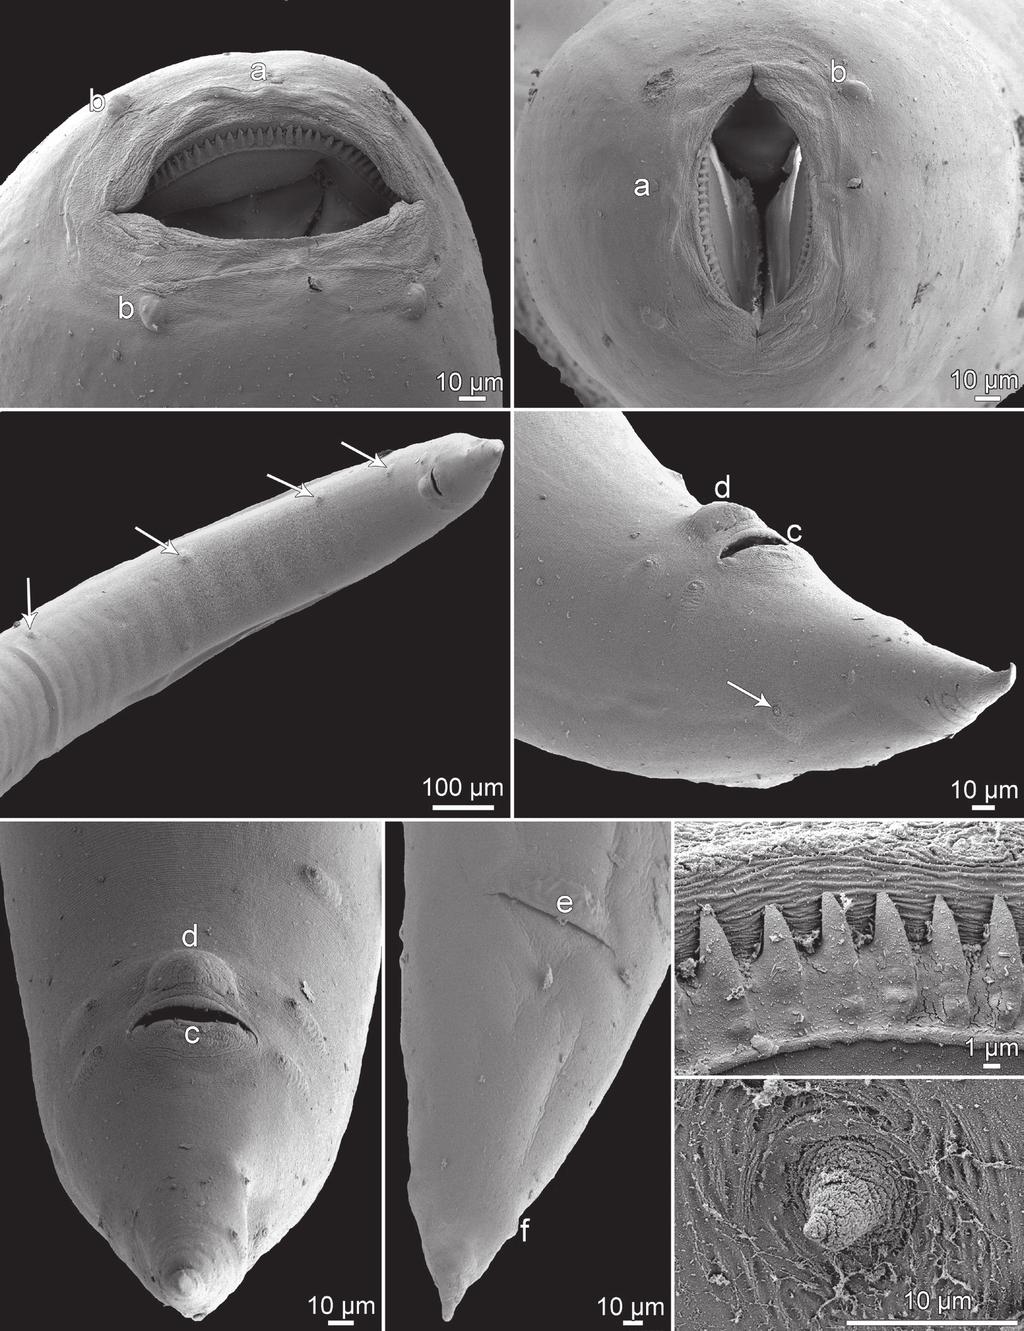 A B C D E F G H Fig. 4. Cucullanus baylisi Campana-Rouget, 1961 from Synodontis schall (Bloch et Schneider), scanning electron micrographs.